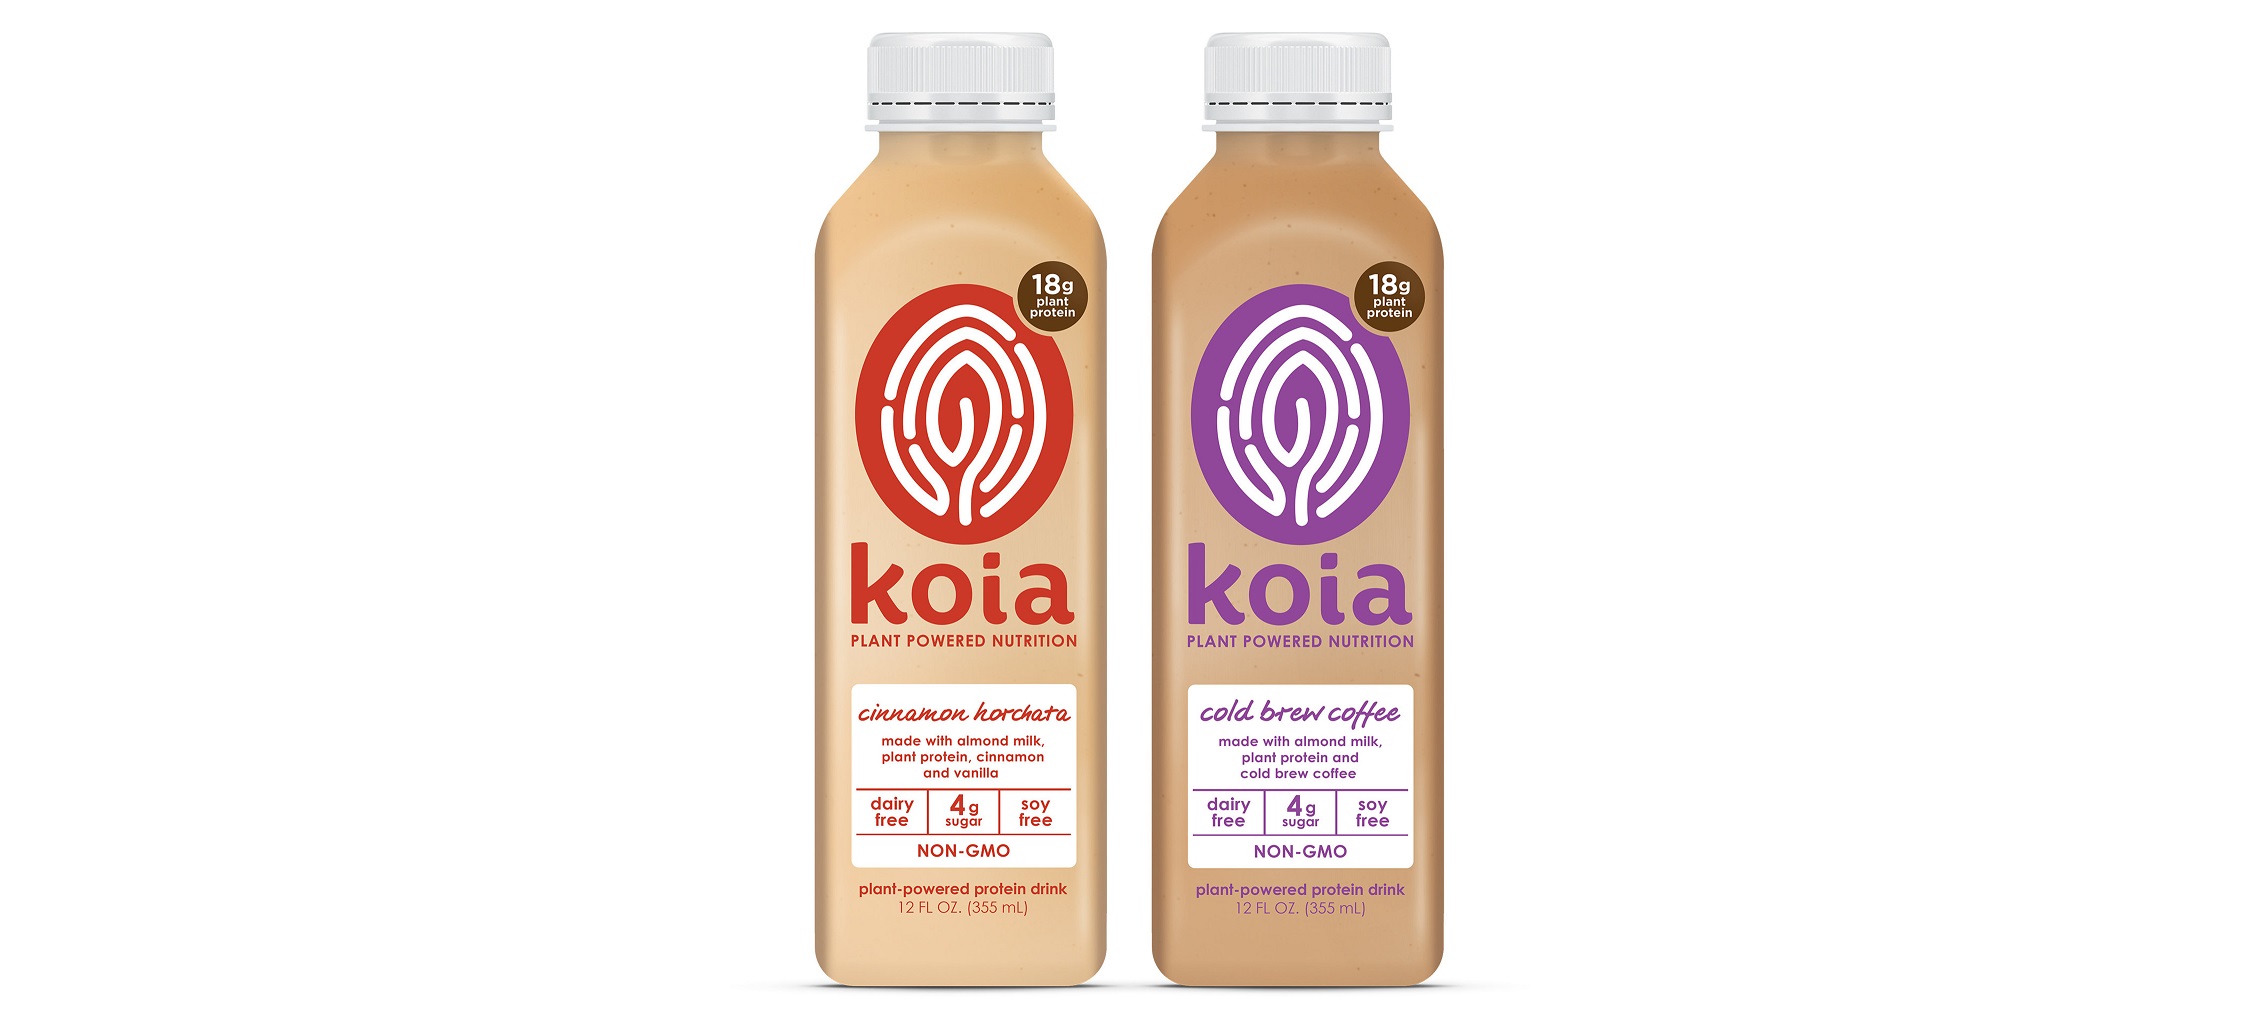 Koia Introduces New Flavors